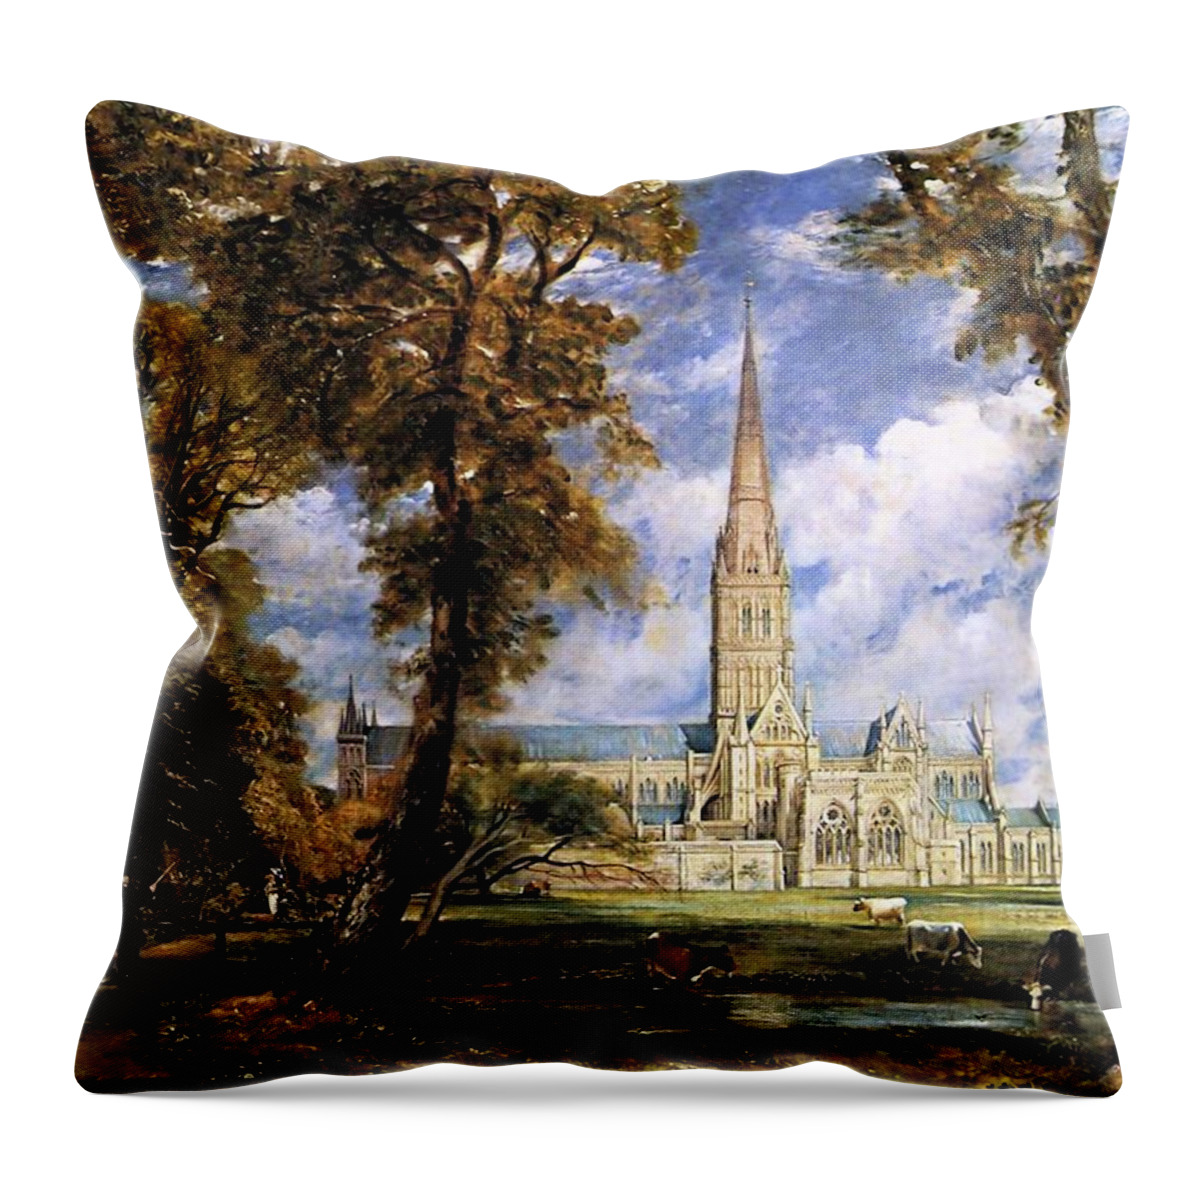 View Of Salisbury Cathdral Throw Pillow featuring the painting View of Salisbury Cathdral by John Constable